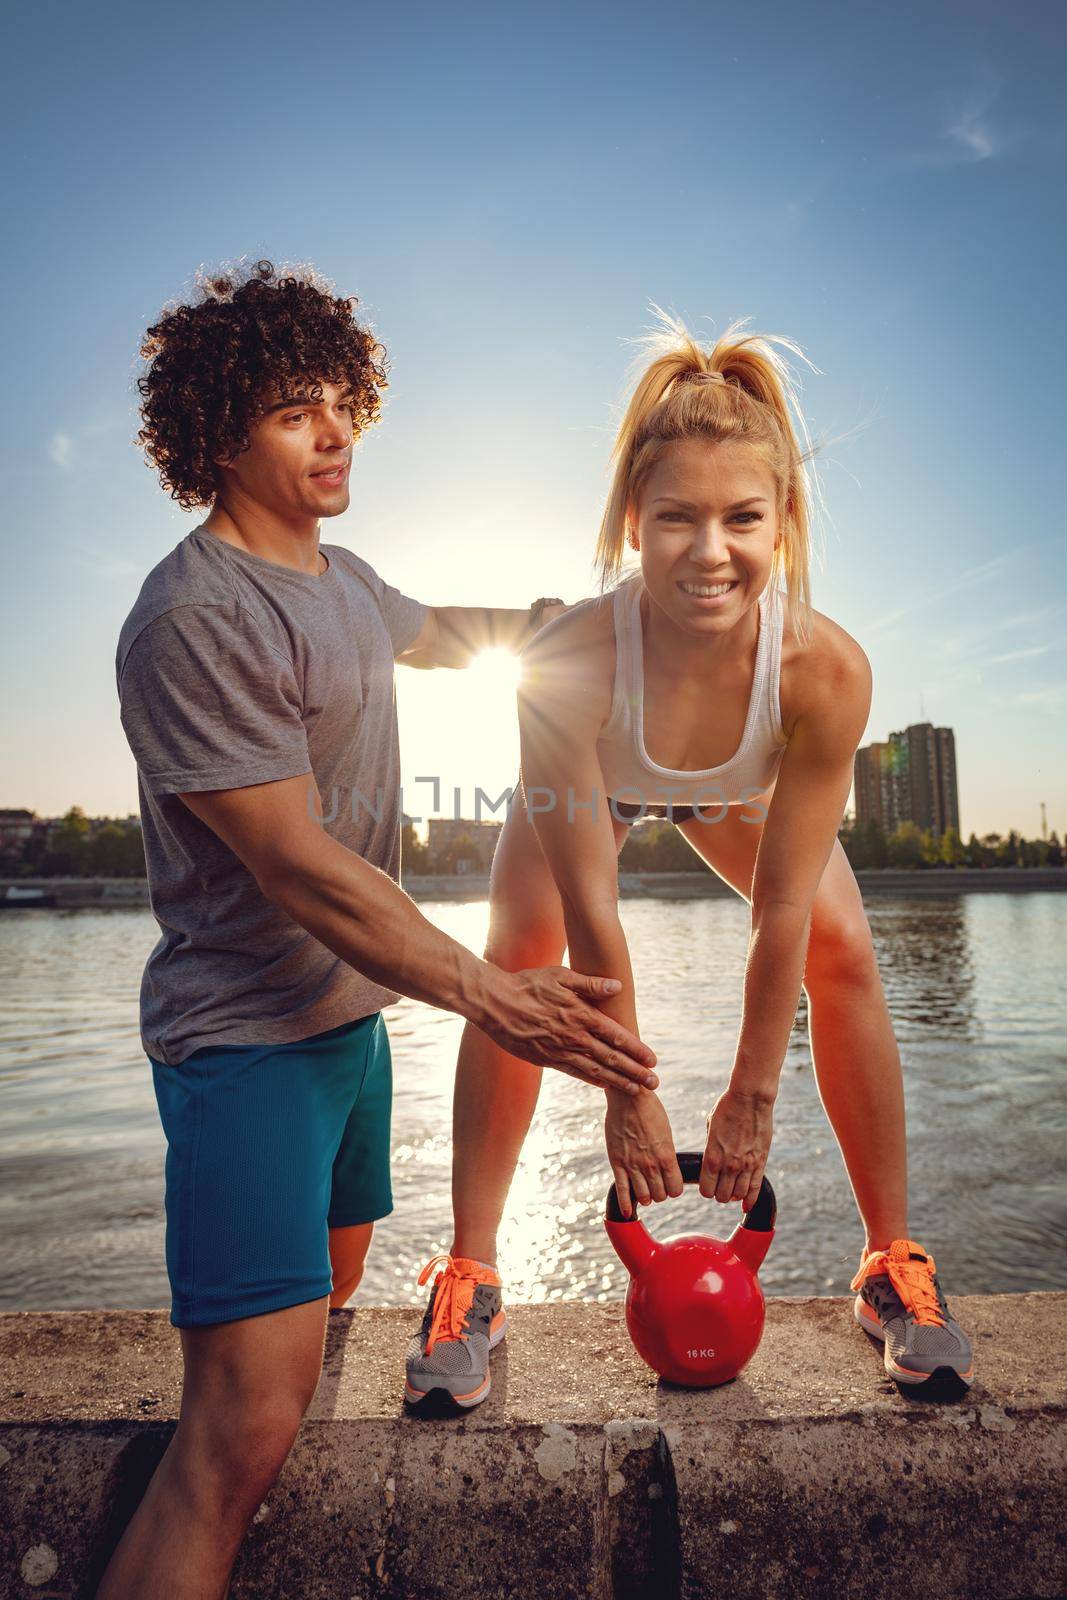 Young fitness couple doing workout with kettlebell on the wall  by the river in a sunset. The woman is crouching and holding kettlebell, and the man support her.